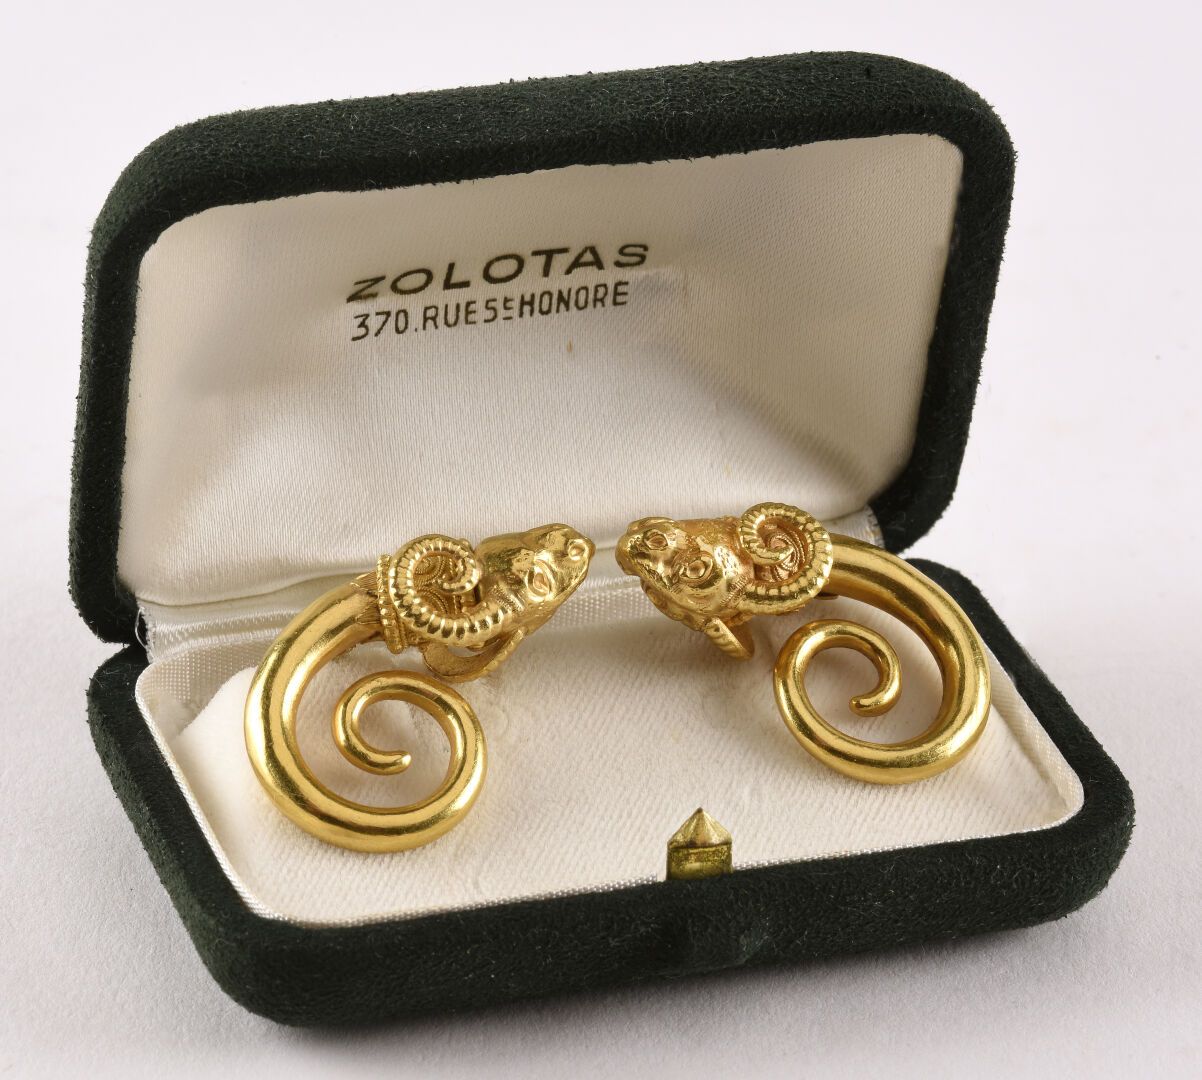 ZOLOTAS Pair of ear clips in yellow gold 18K (750 thousandths) with coiled patte&hellip;